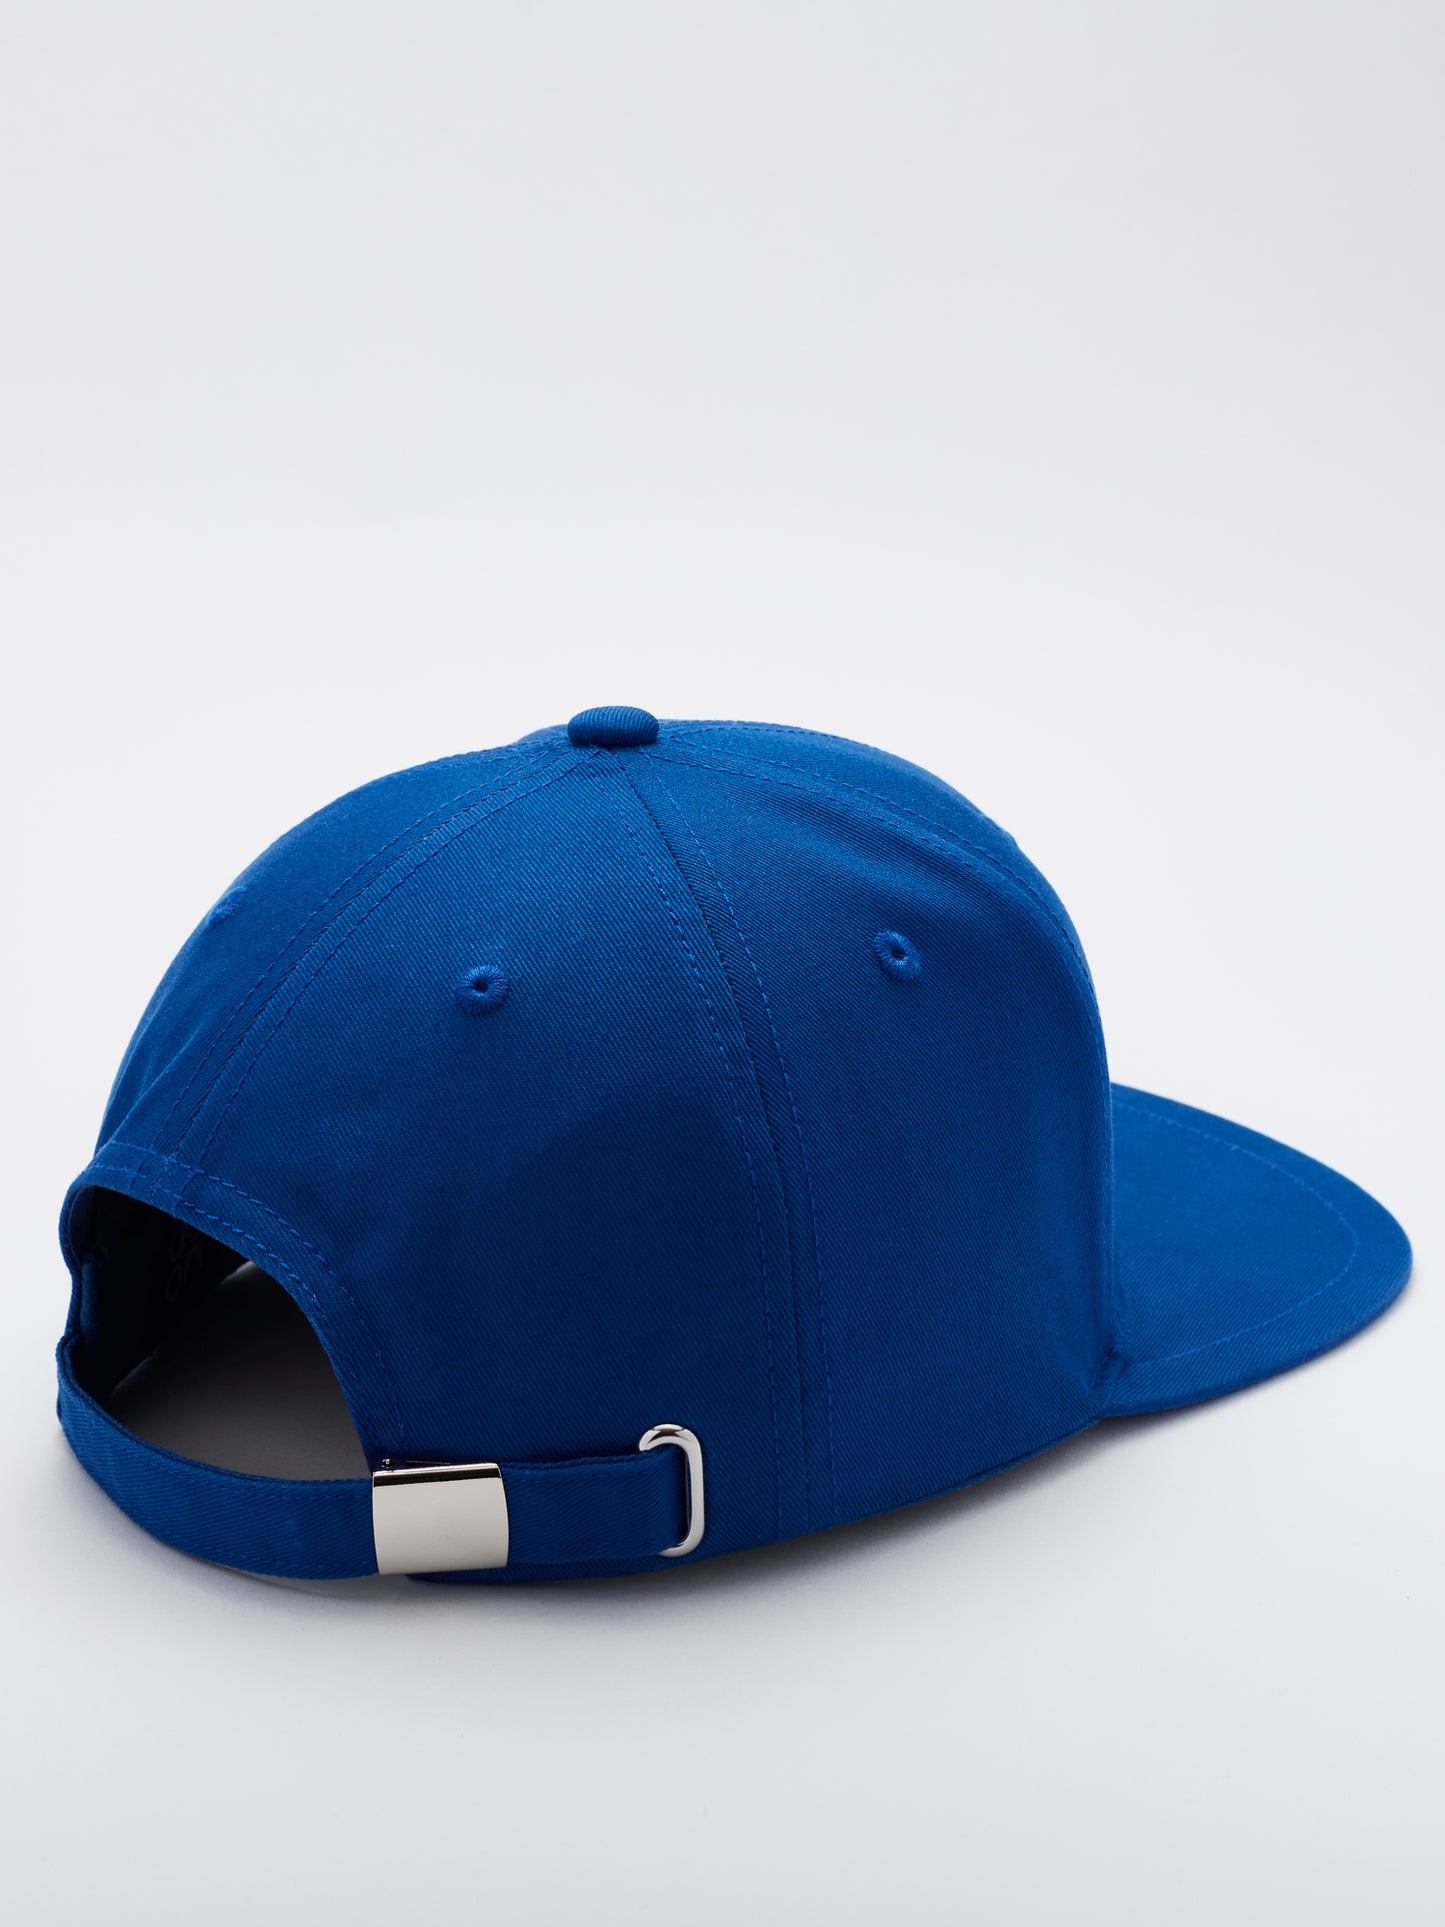 Load image into Gallery viewer, MOOD Caps - XX smiley face baseball cap flat brim in blue color back view
